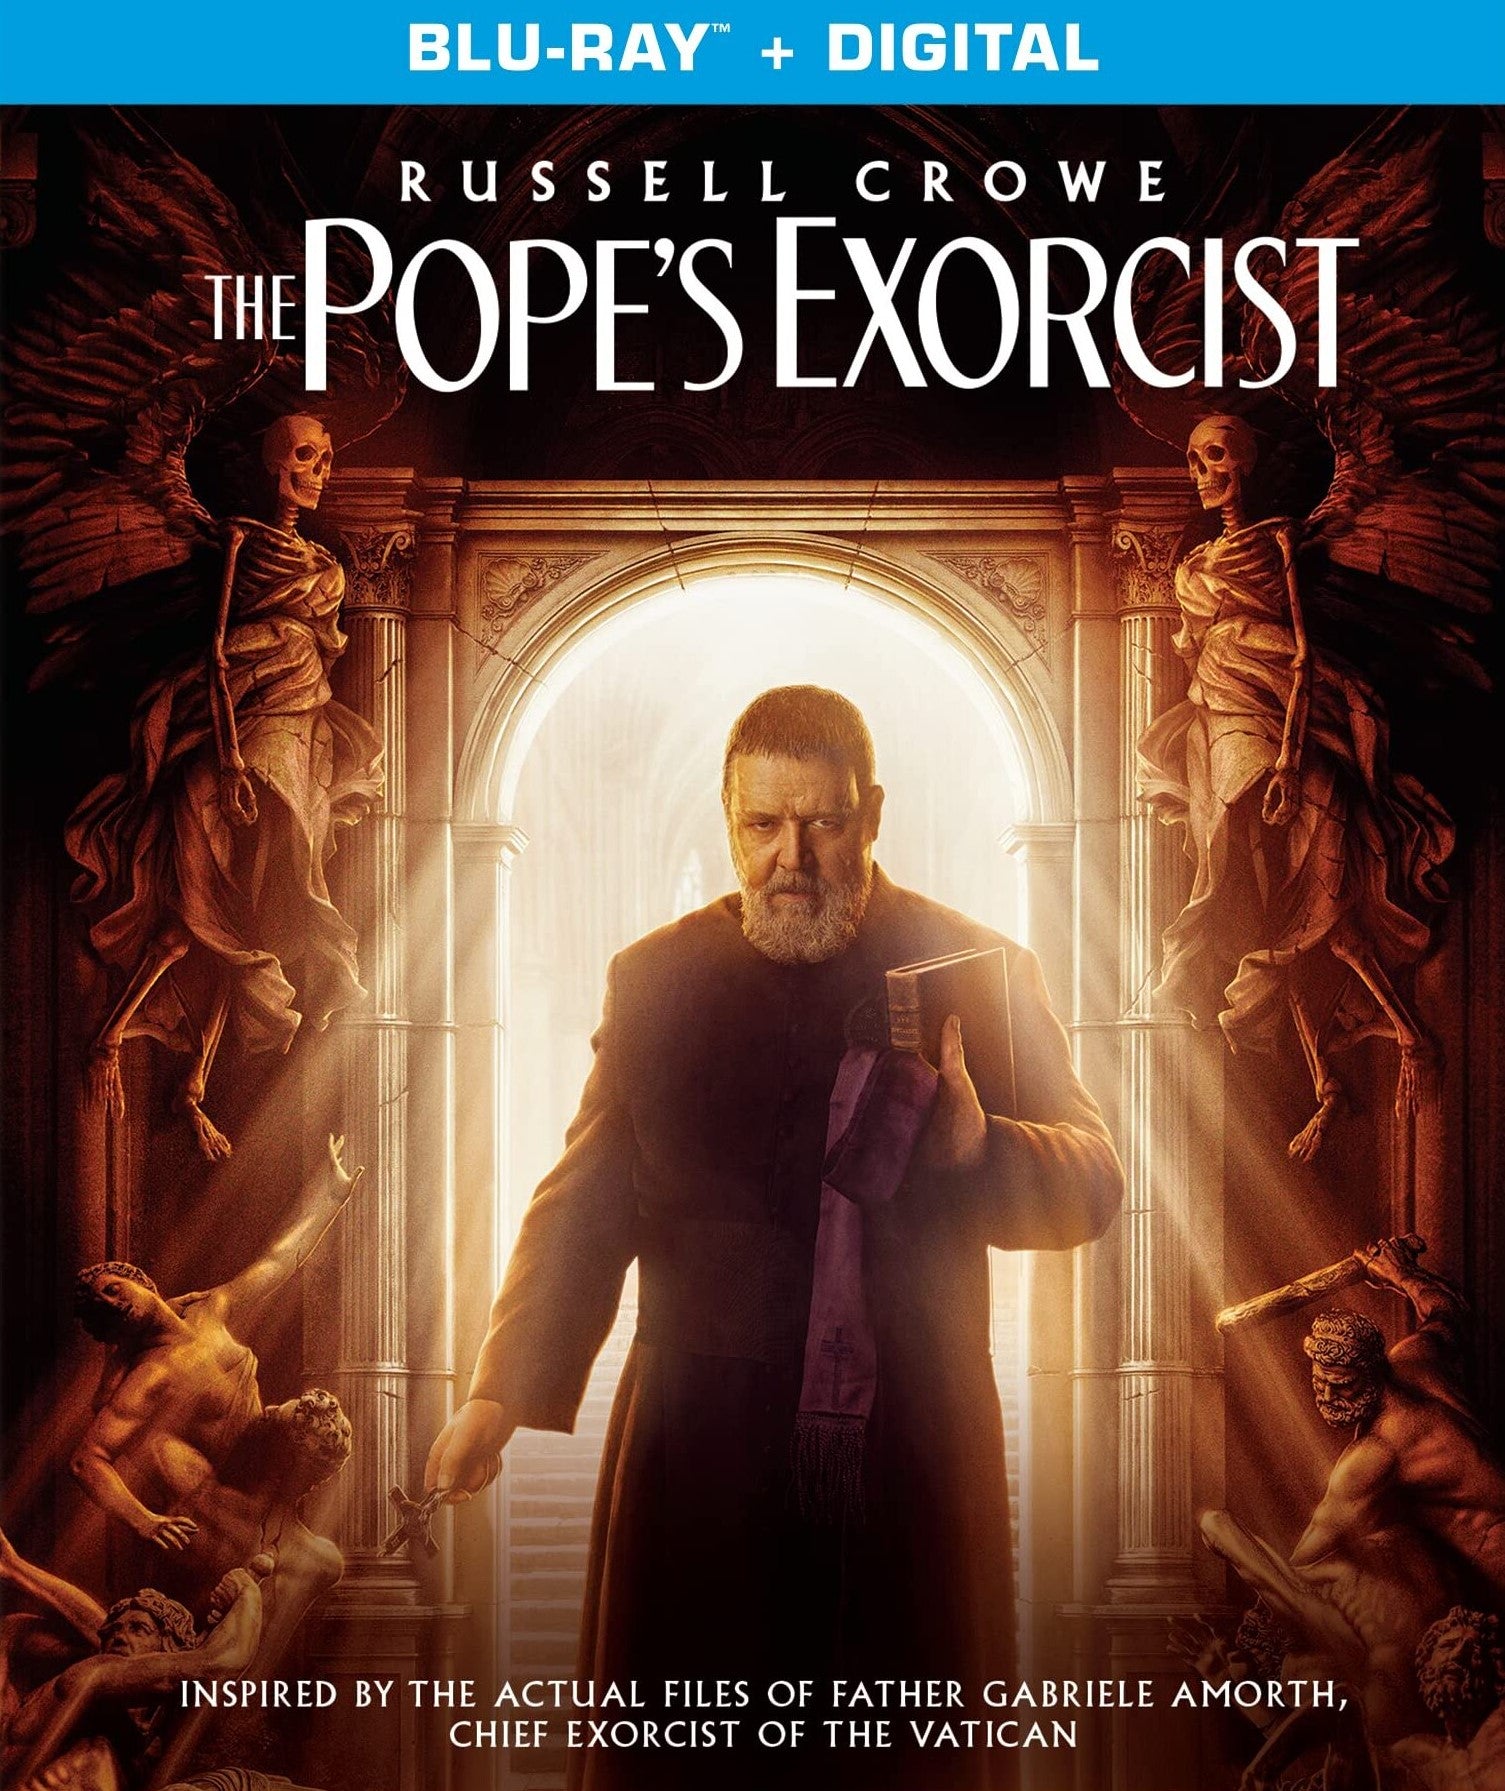 THE POPE'S EXORCIST BLU-RAY